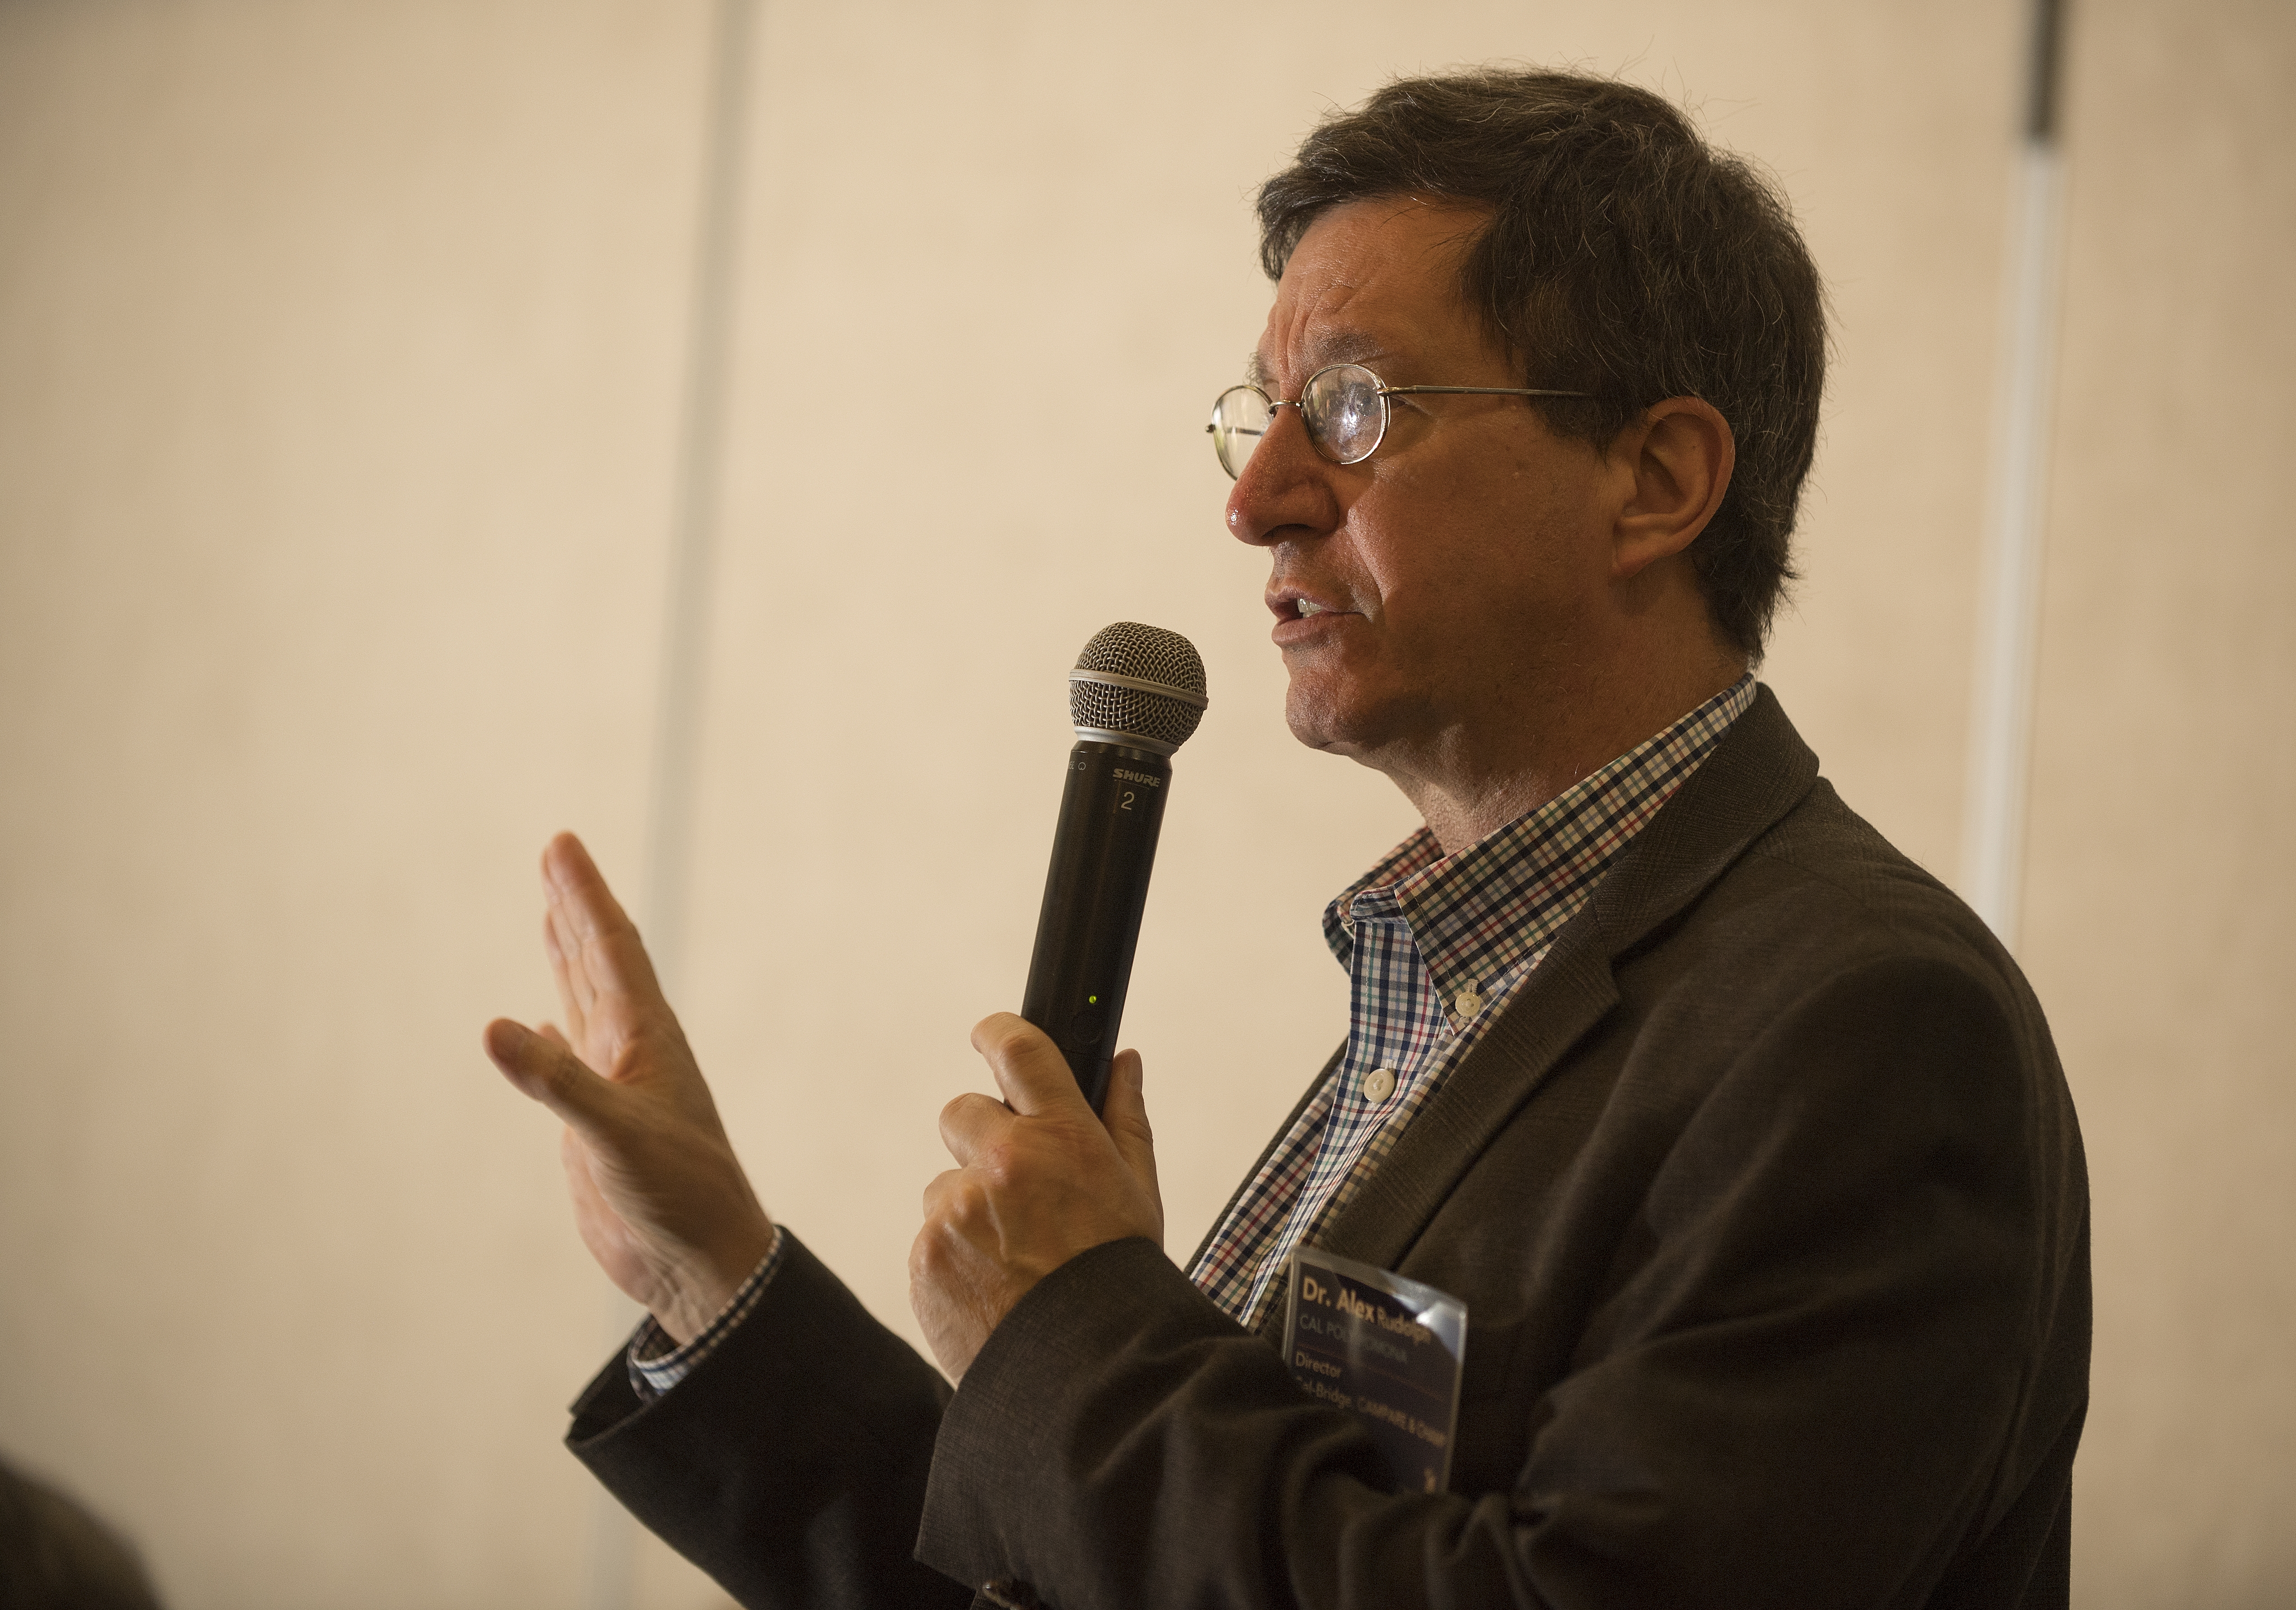 Photo of Cal-Bridge director Alex Rudolph speaking with a microphone in his hand